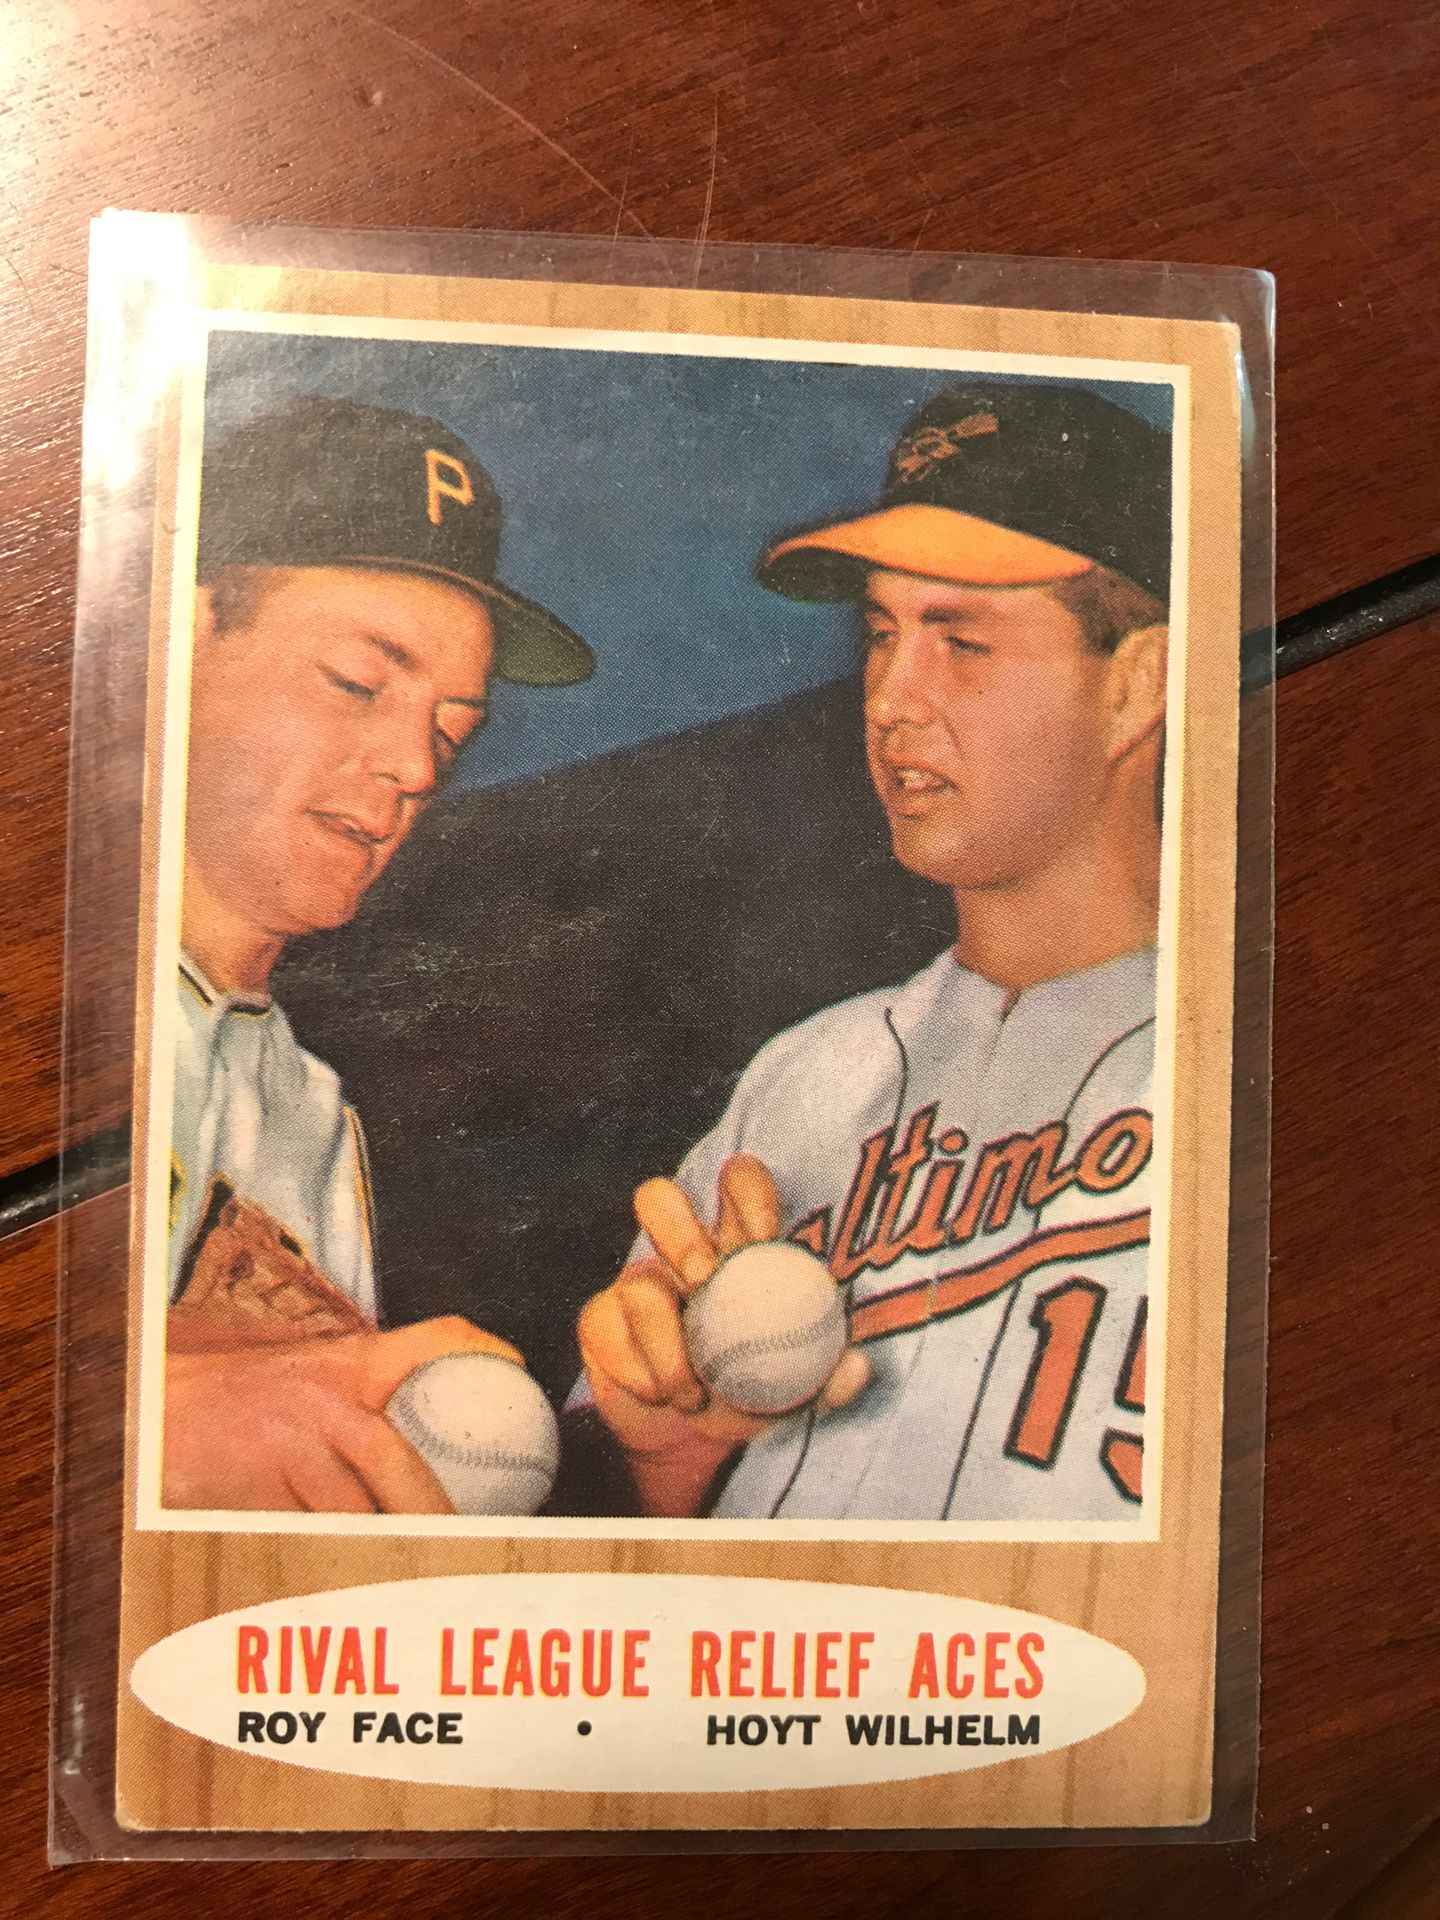 1962 Topps #423 Roy Face/Hoyt Wilhelm Rival League Relief Aces baseball ⚾️ card!